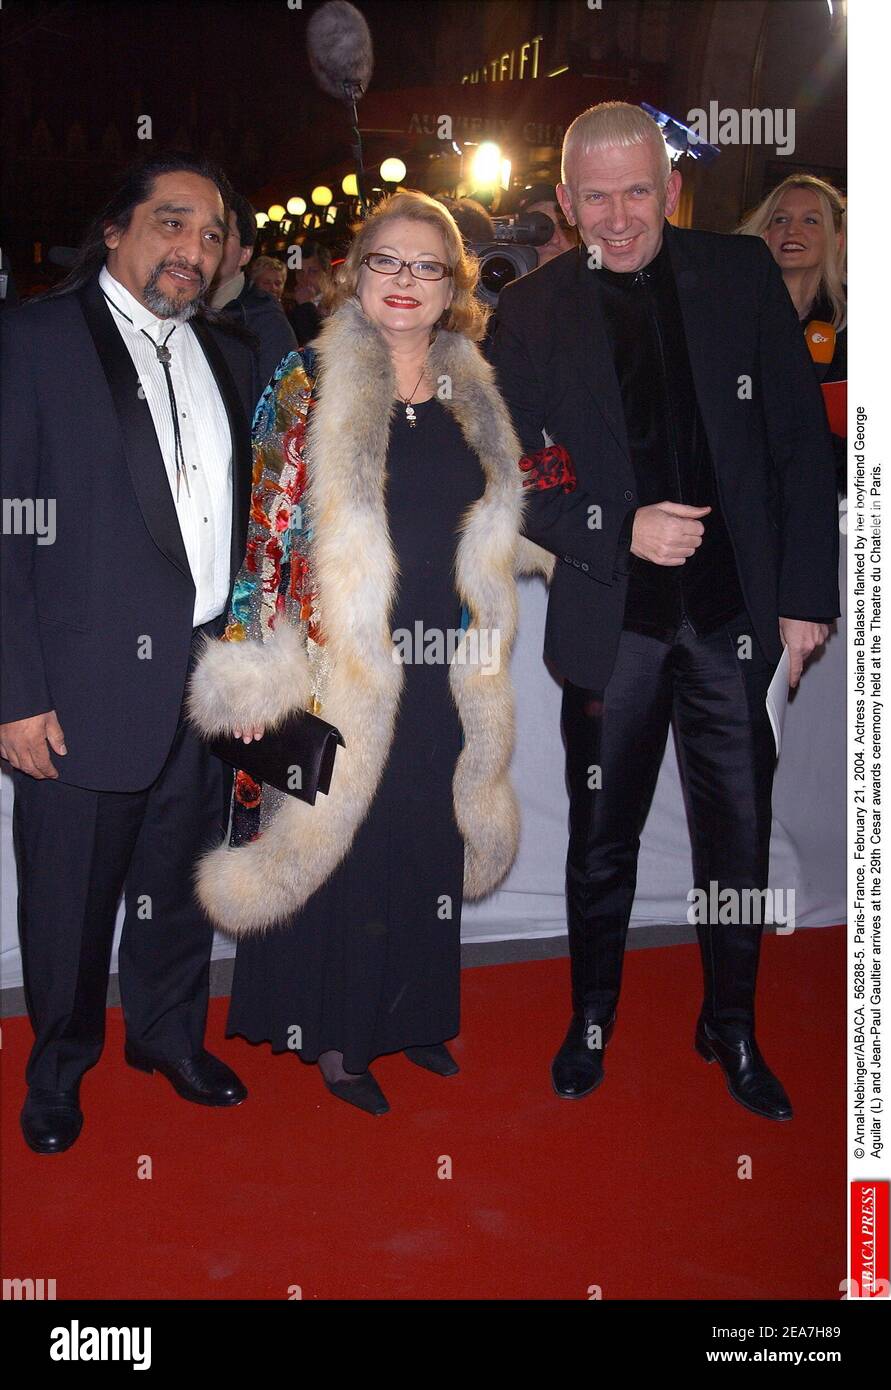 © Arnal-Nebinger/ABACA. 56288-5. Paris-France, February 21, 2004. Actress Josiane Balasko flanked by her boyfriend George Aguilar (L) and Jean-Paul Gaultier arrives at the 29th Cesar awards ceremony held at the Theatre du Chatelet in Paris. Stock Photo